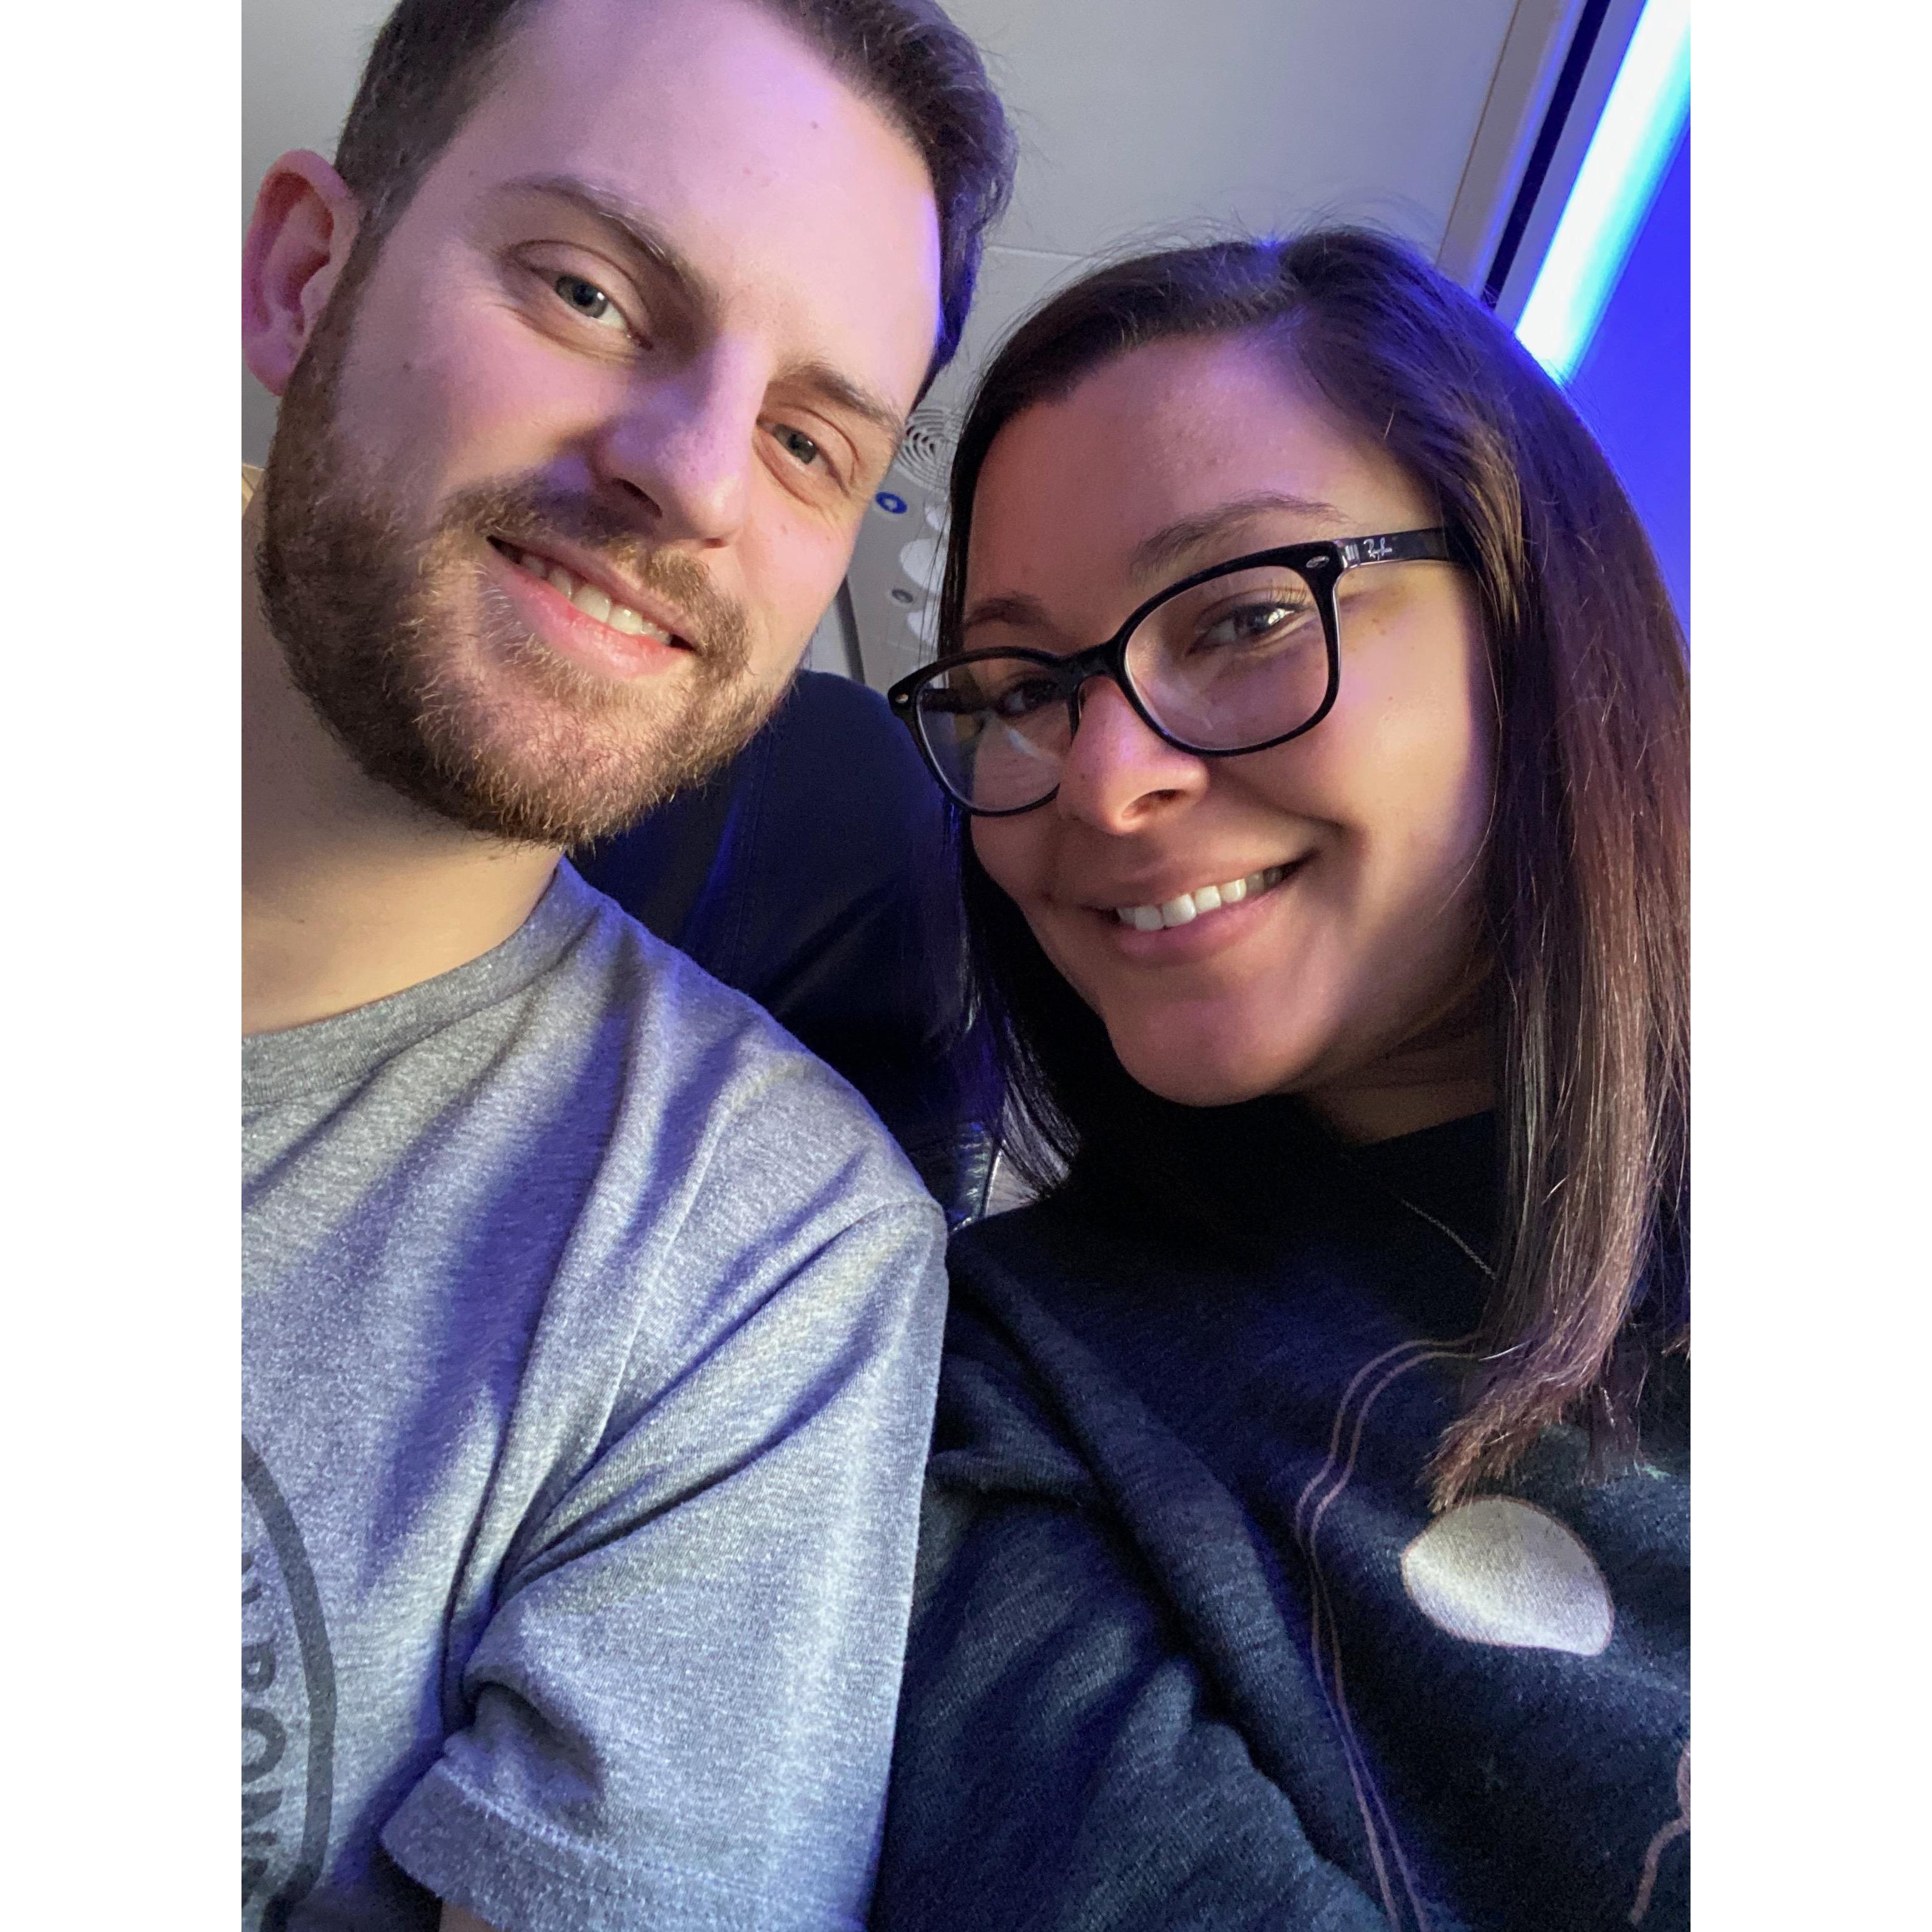 on the plane to our first big trip together in Hawaii